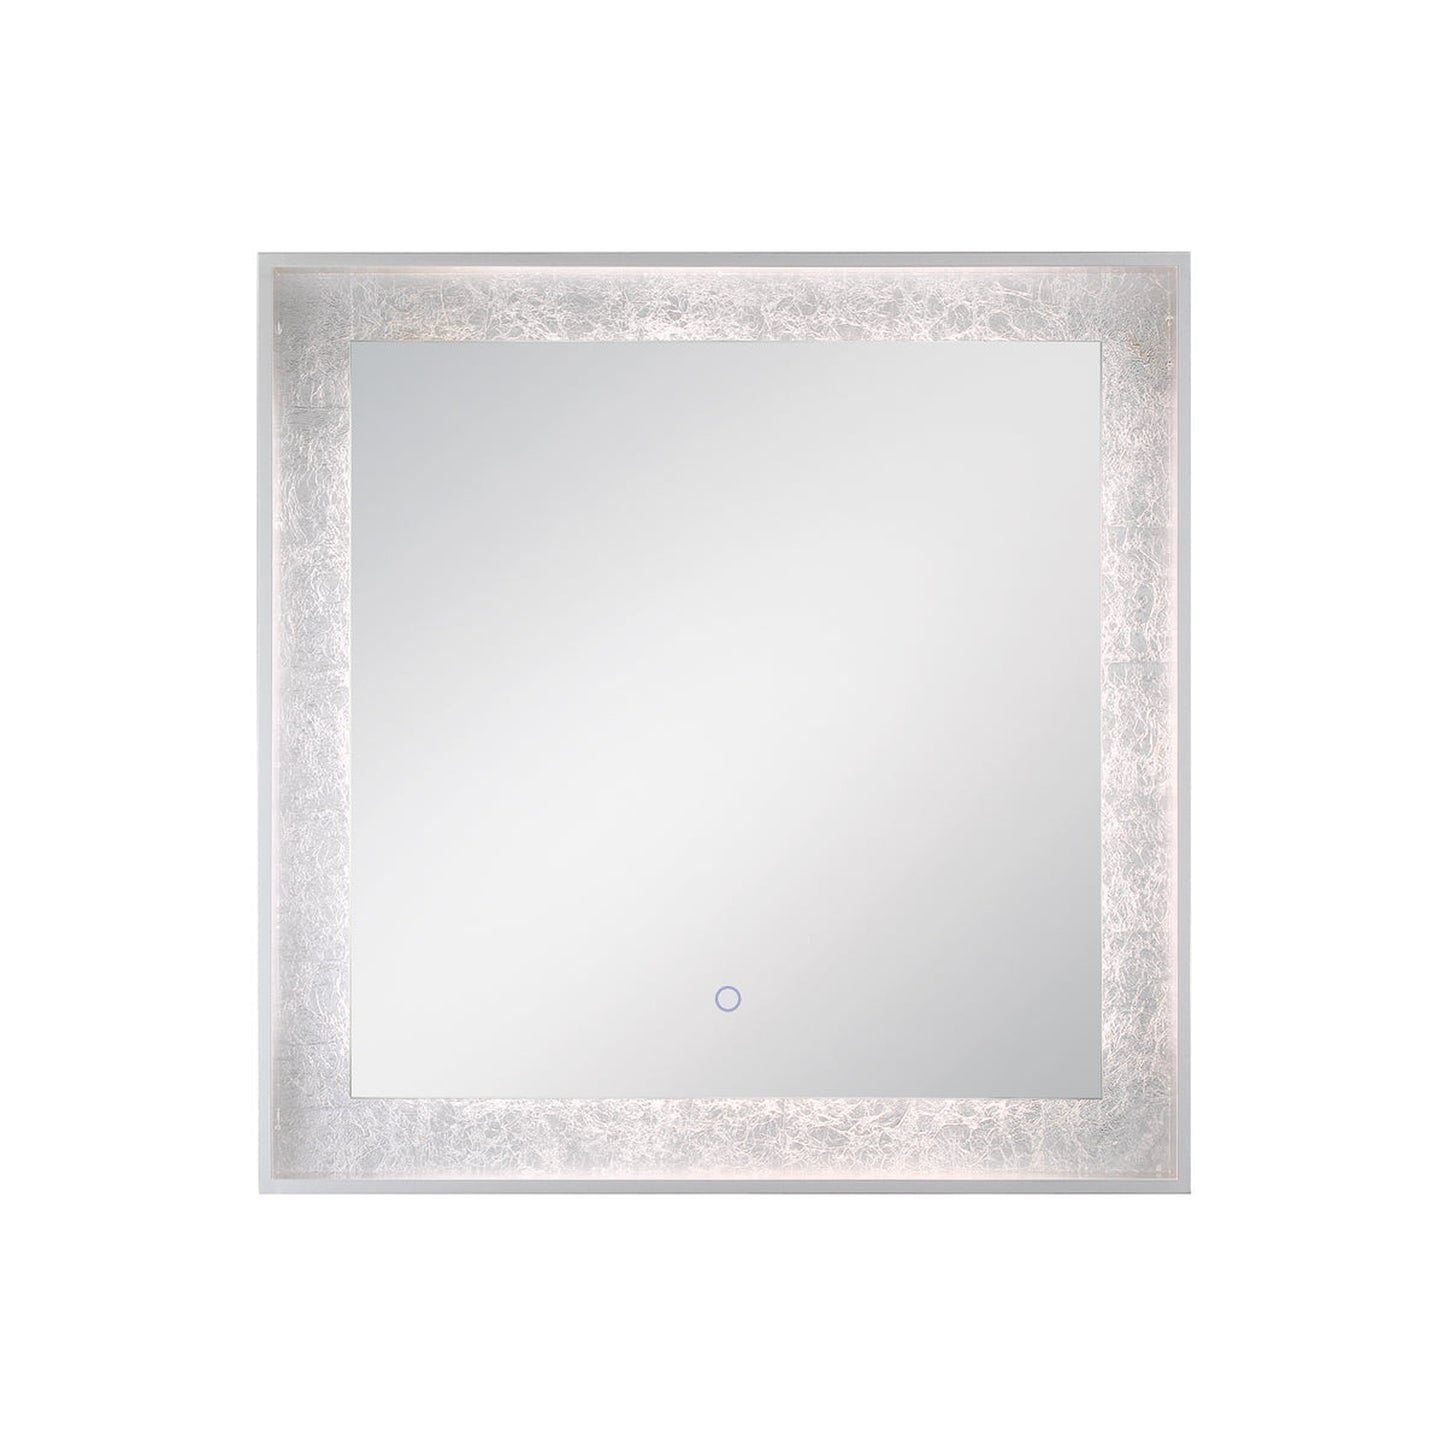 Eurofase Lighting Anya 32" x 32" Edge-Lit Integrated LED Square Mirror With Silver Frame